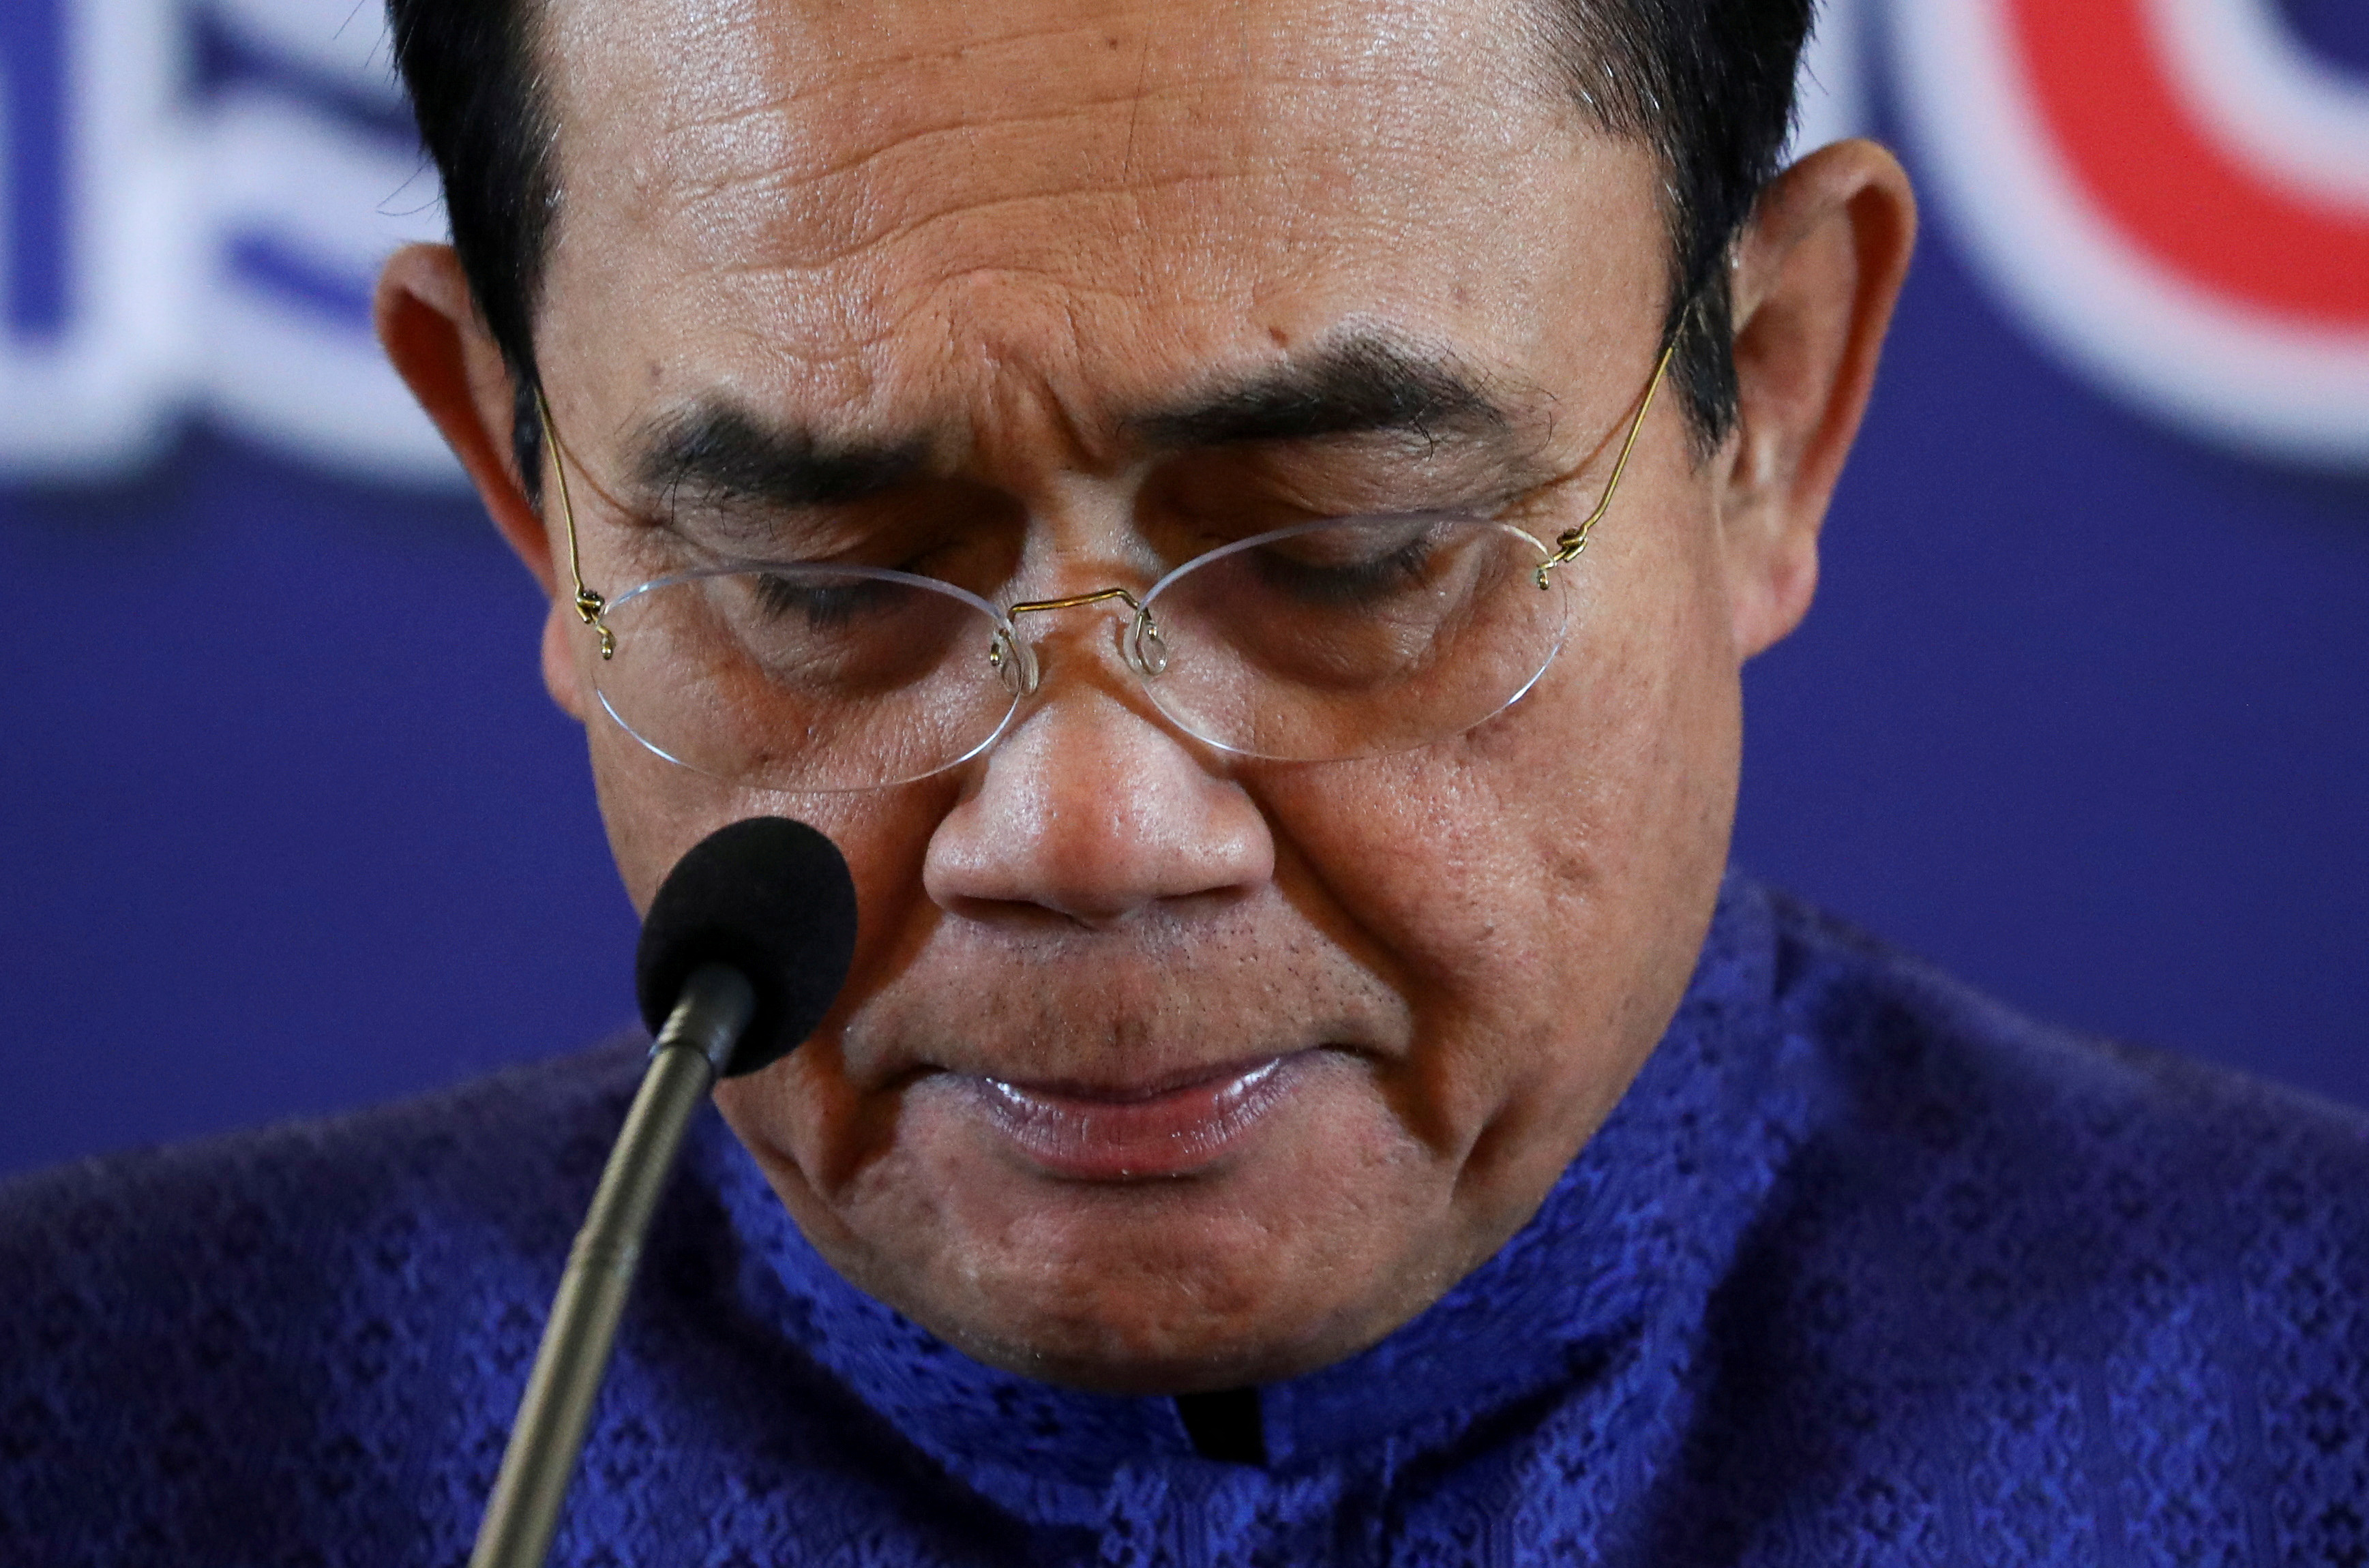 Thailand's Prime Minister Prayuth Chan-ocha speaks during a news conference in Bangkok